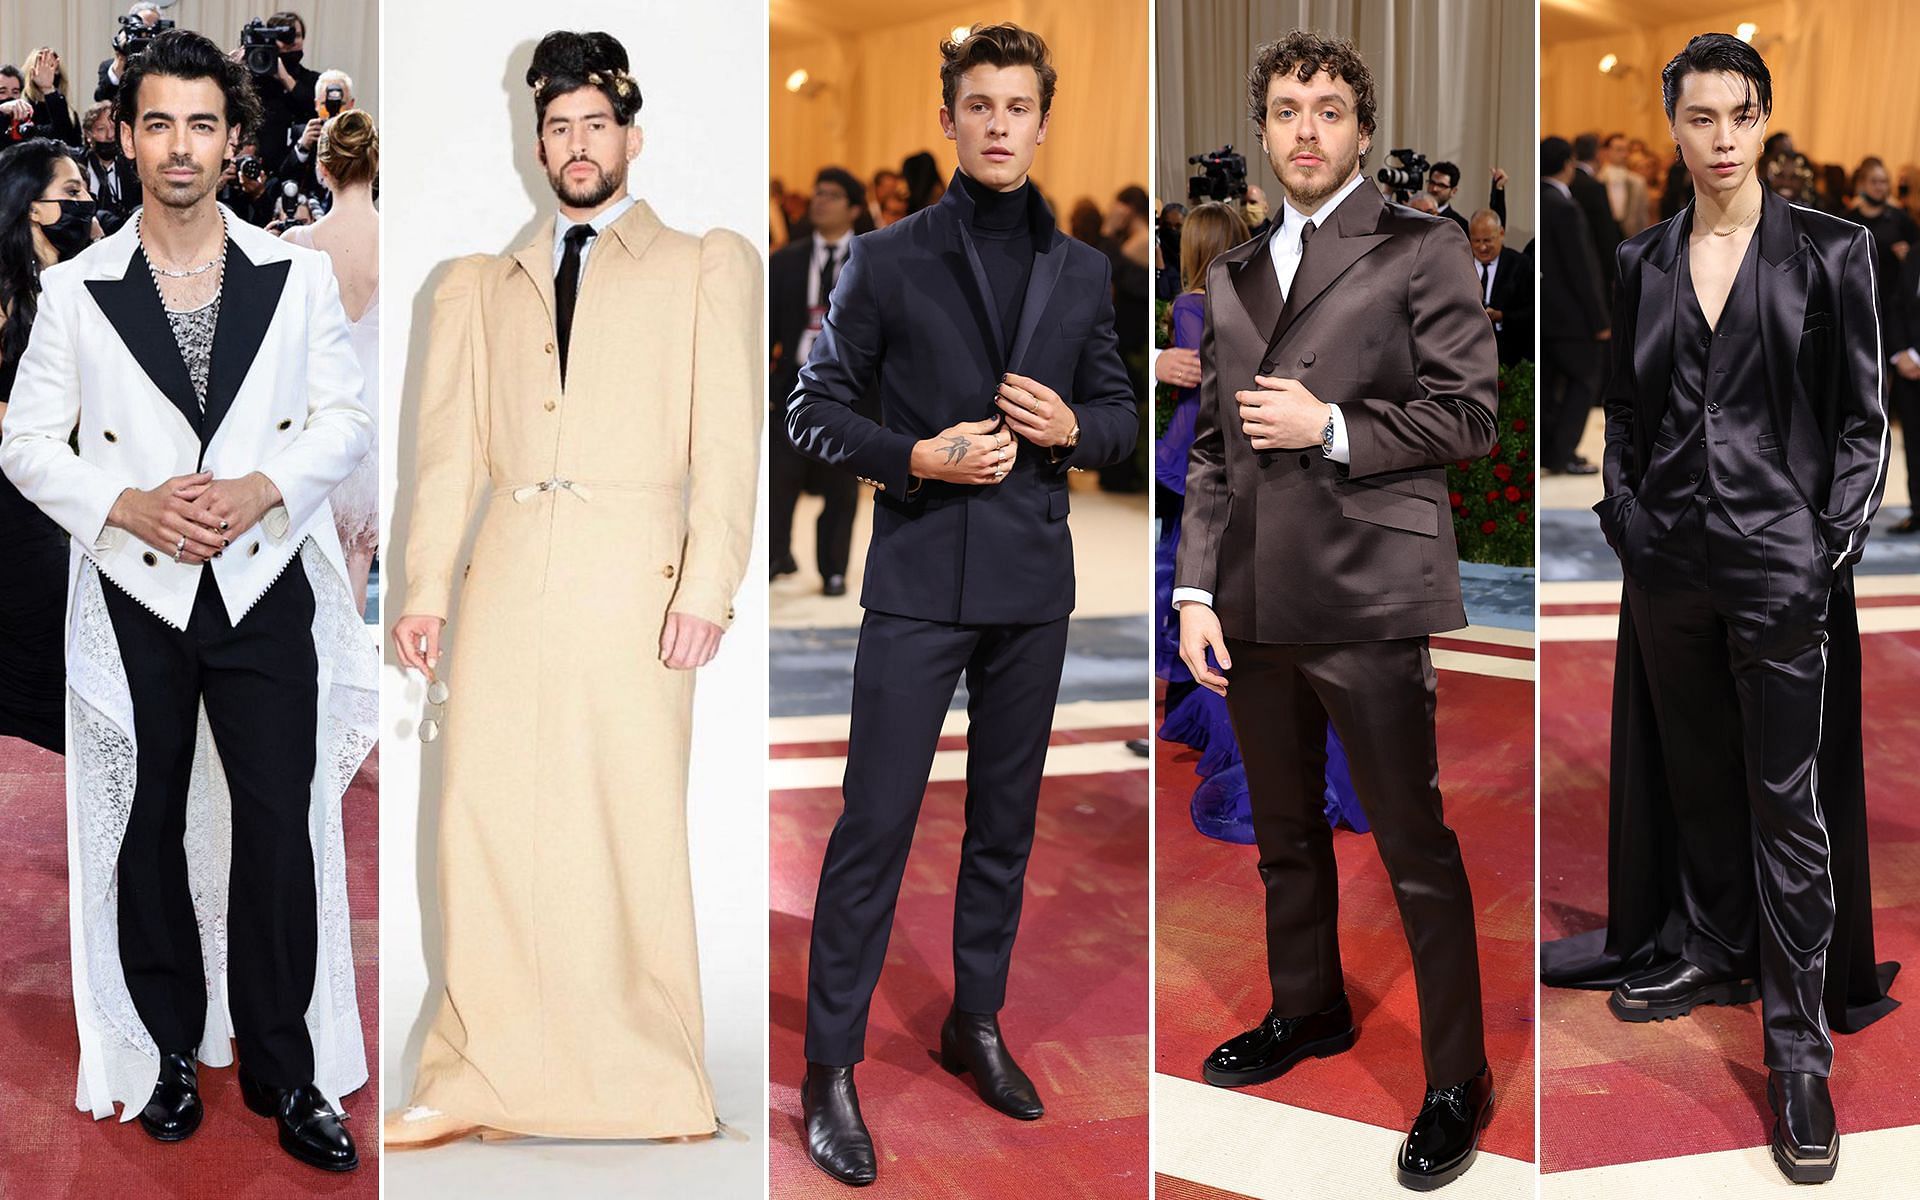 Met Gala 2022 5 bestdressed men and what they wore